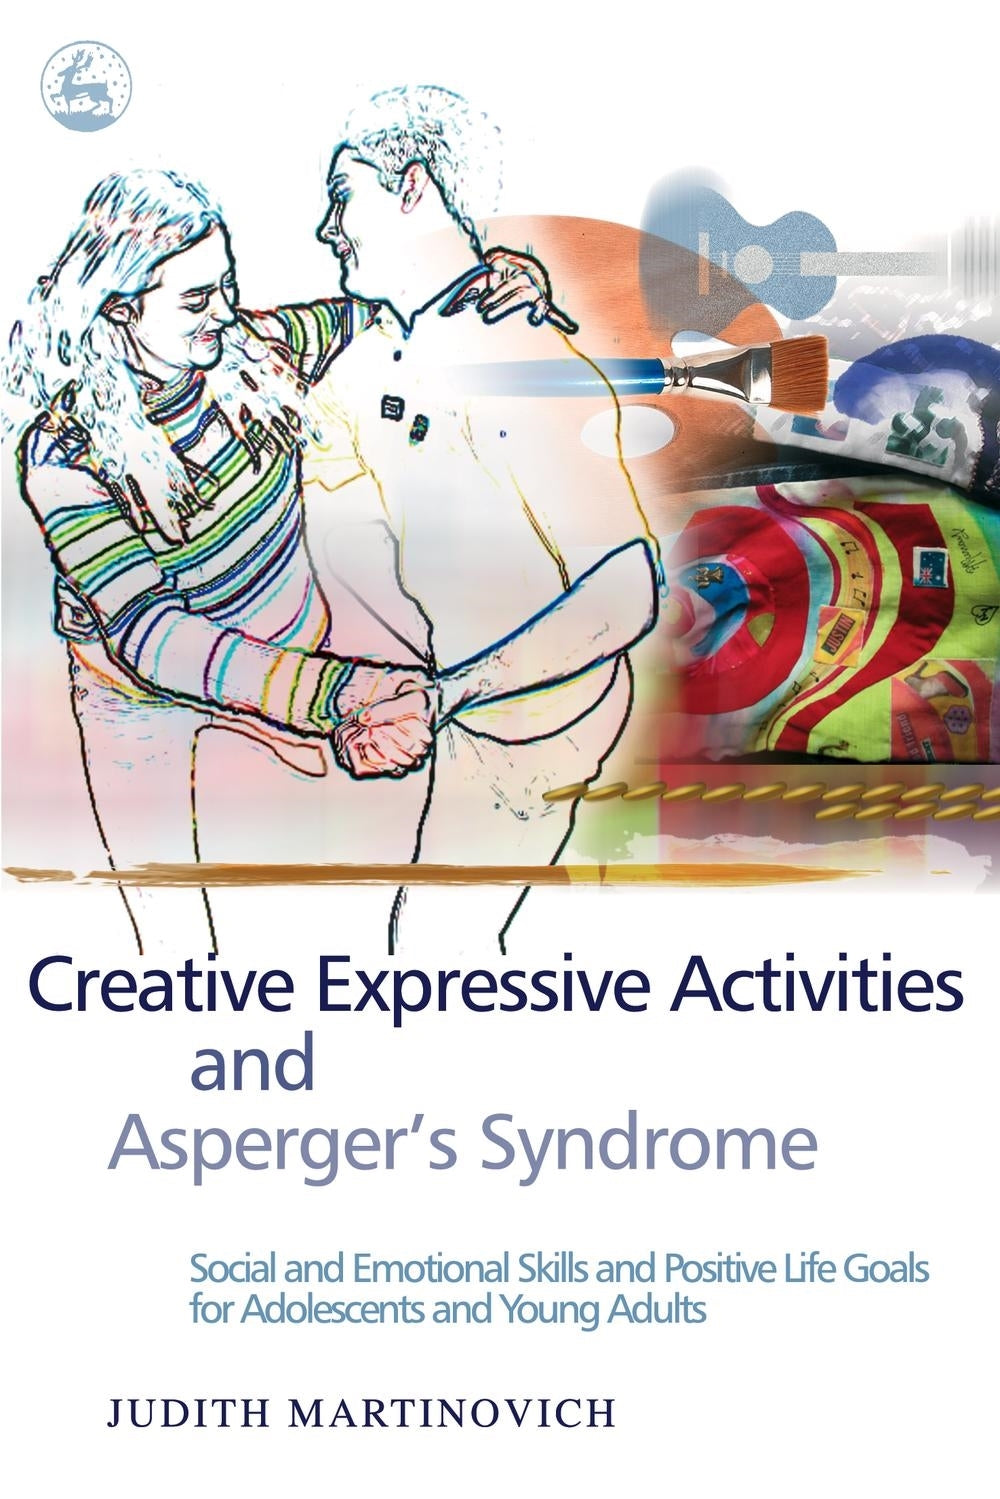 Creative Expressive Activities and Asperger's Syndrome by Judith Martinovich